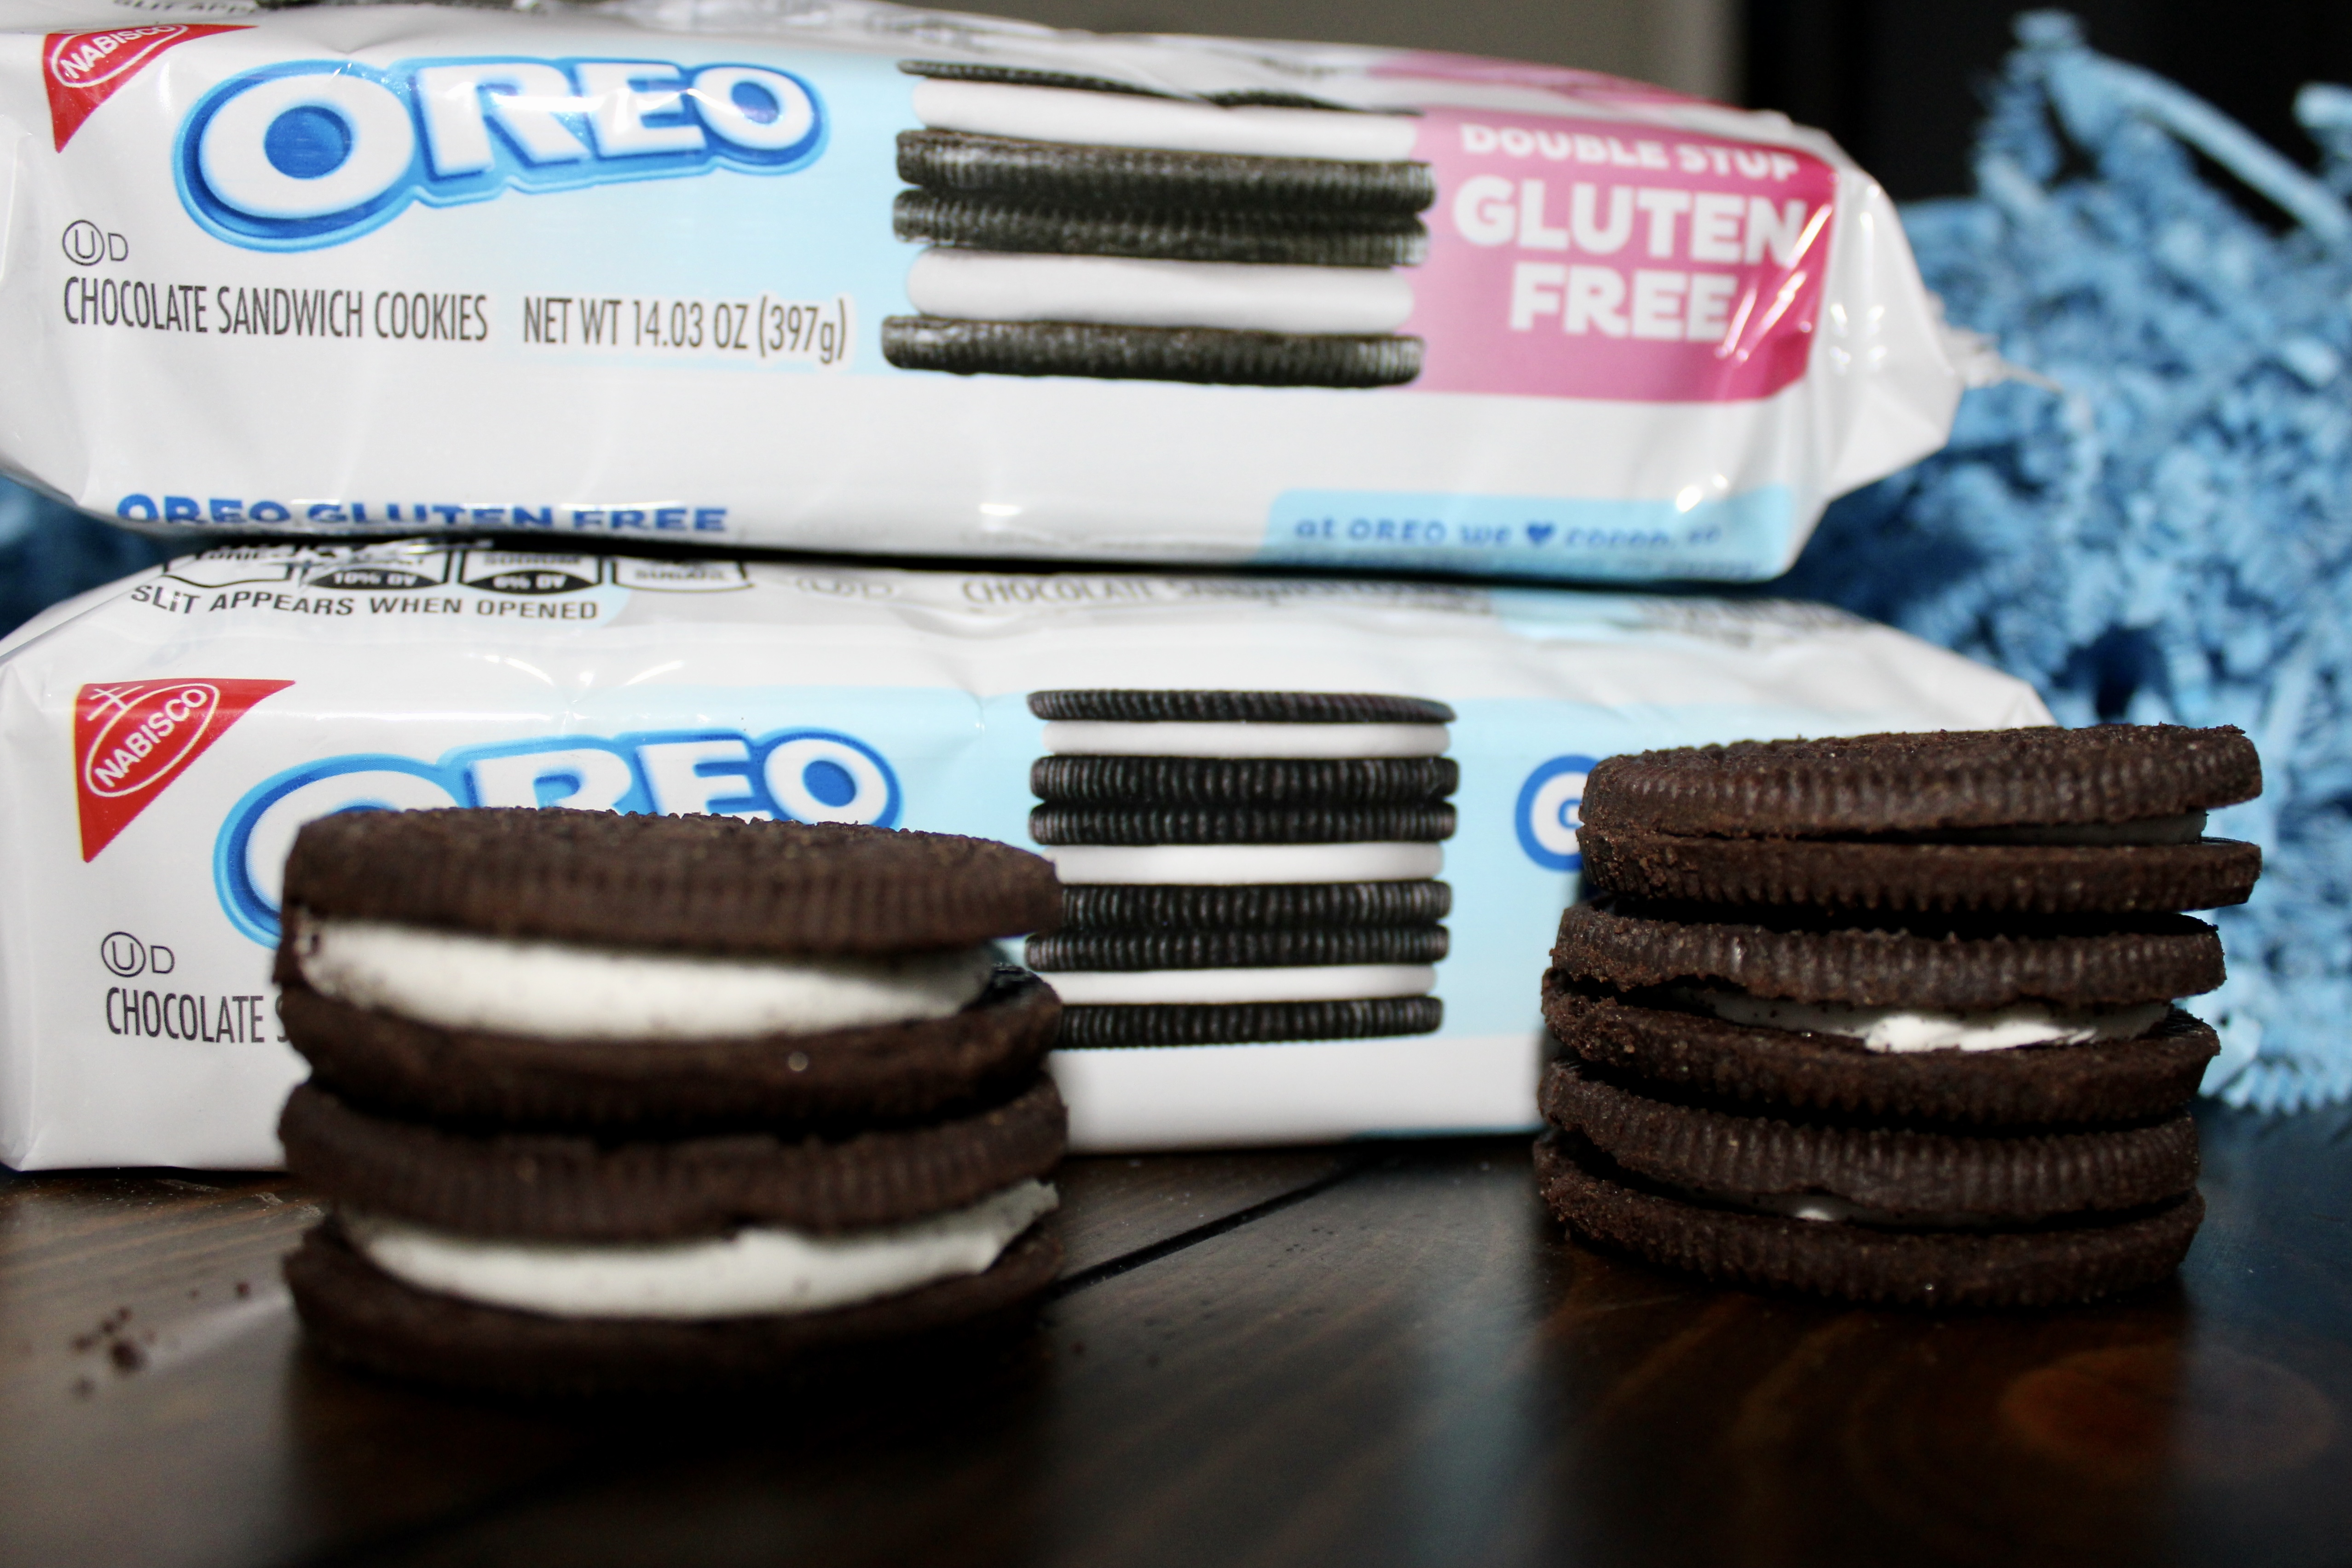 We Tried The New Gluten Free Oreos 1 Thing Really Surprised Us Mlive Com